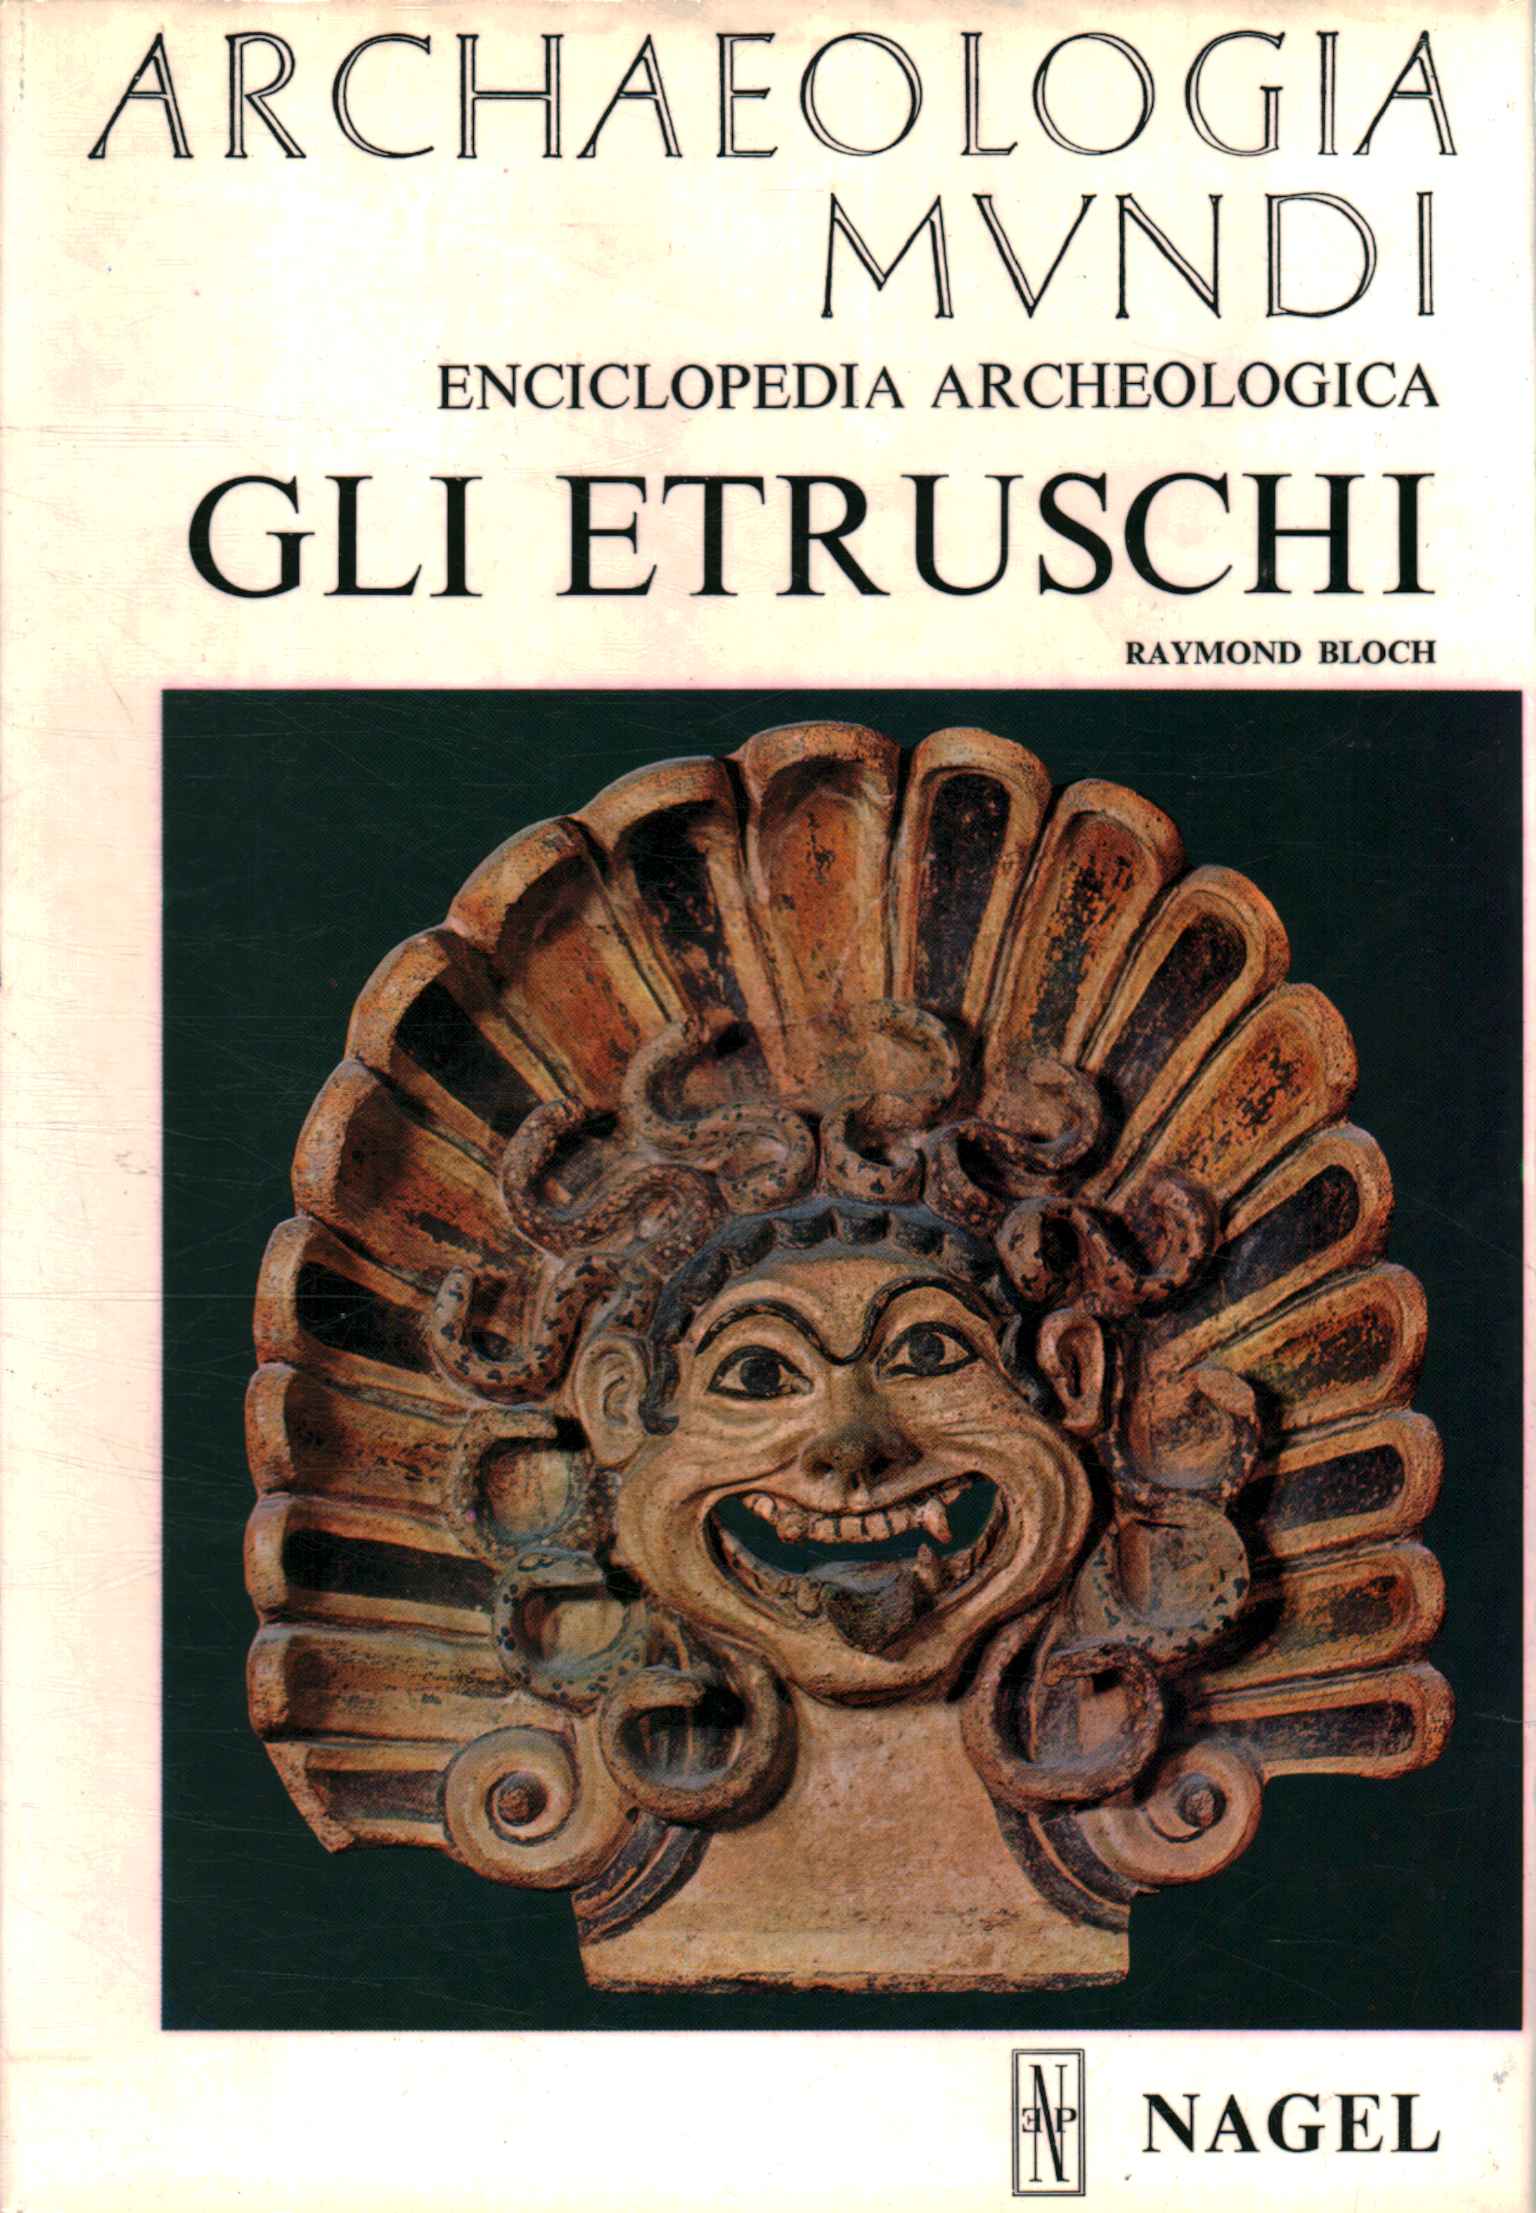 Archaeological encyclopedia. The Etruscans